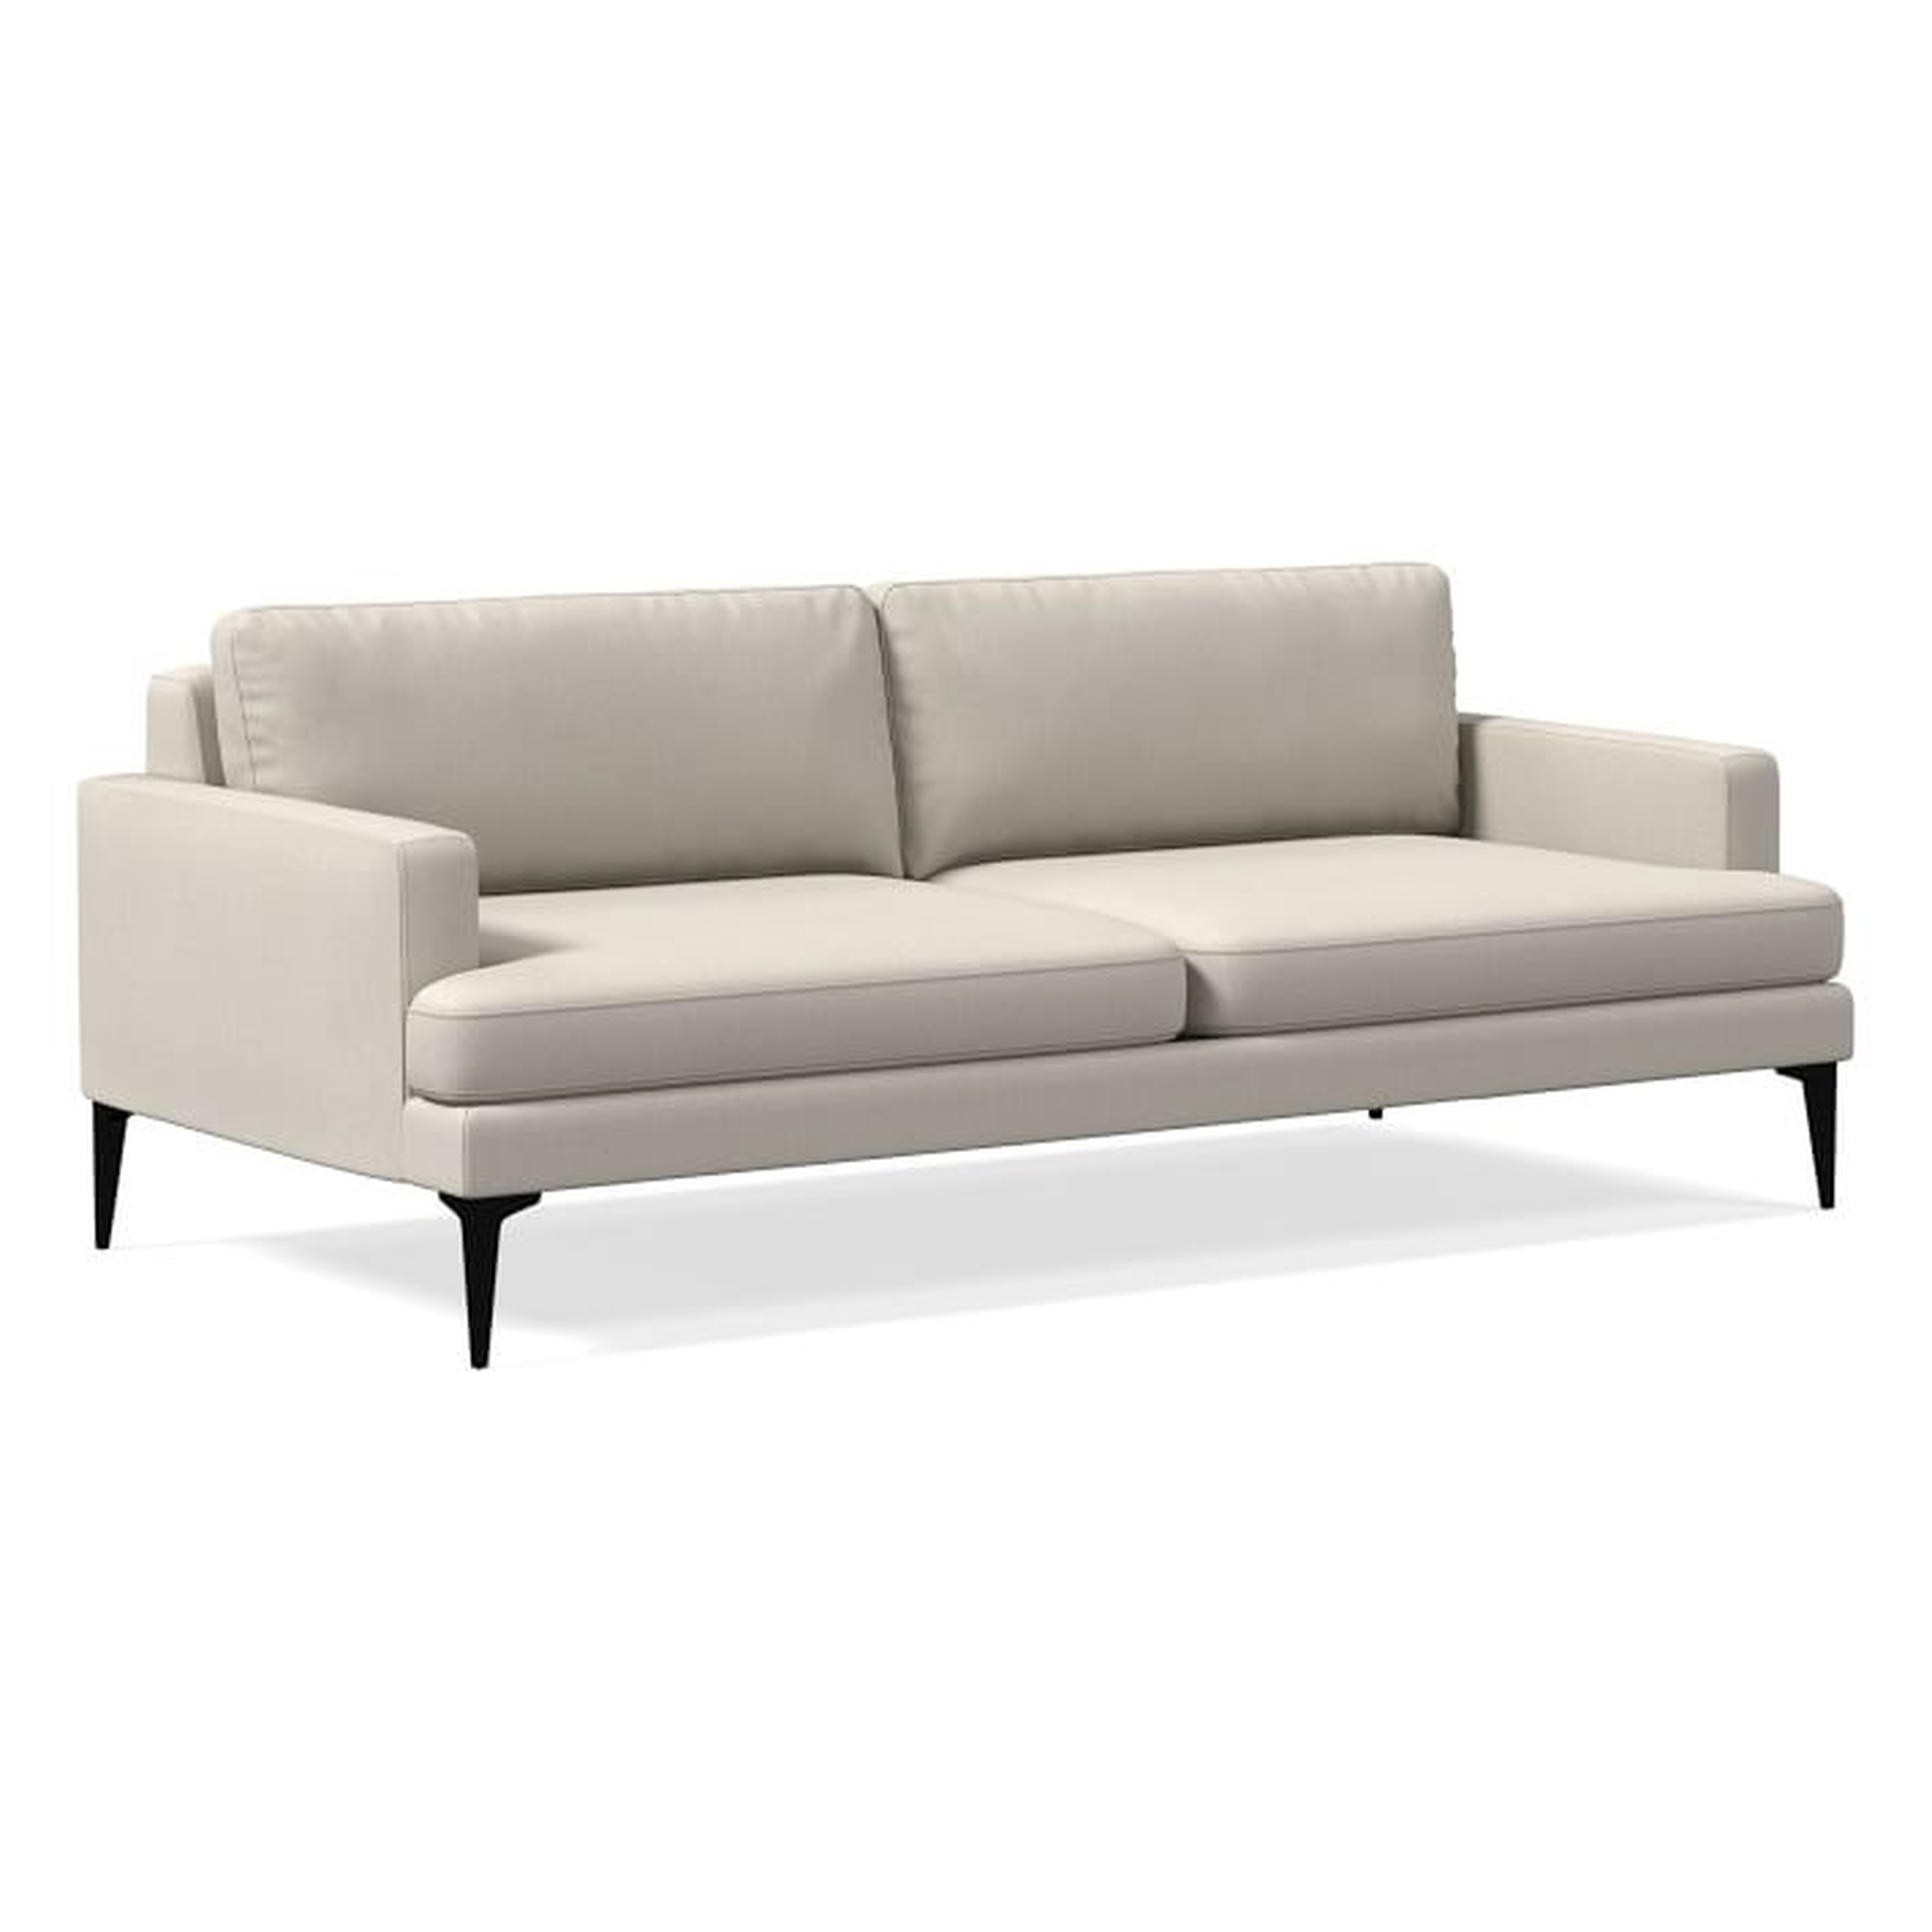 Andes Sofa (86") Stone White - West Elm